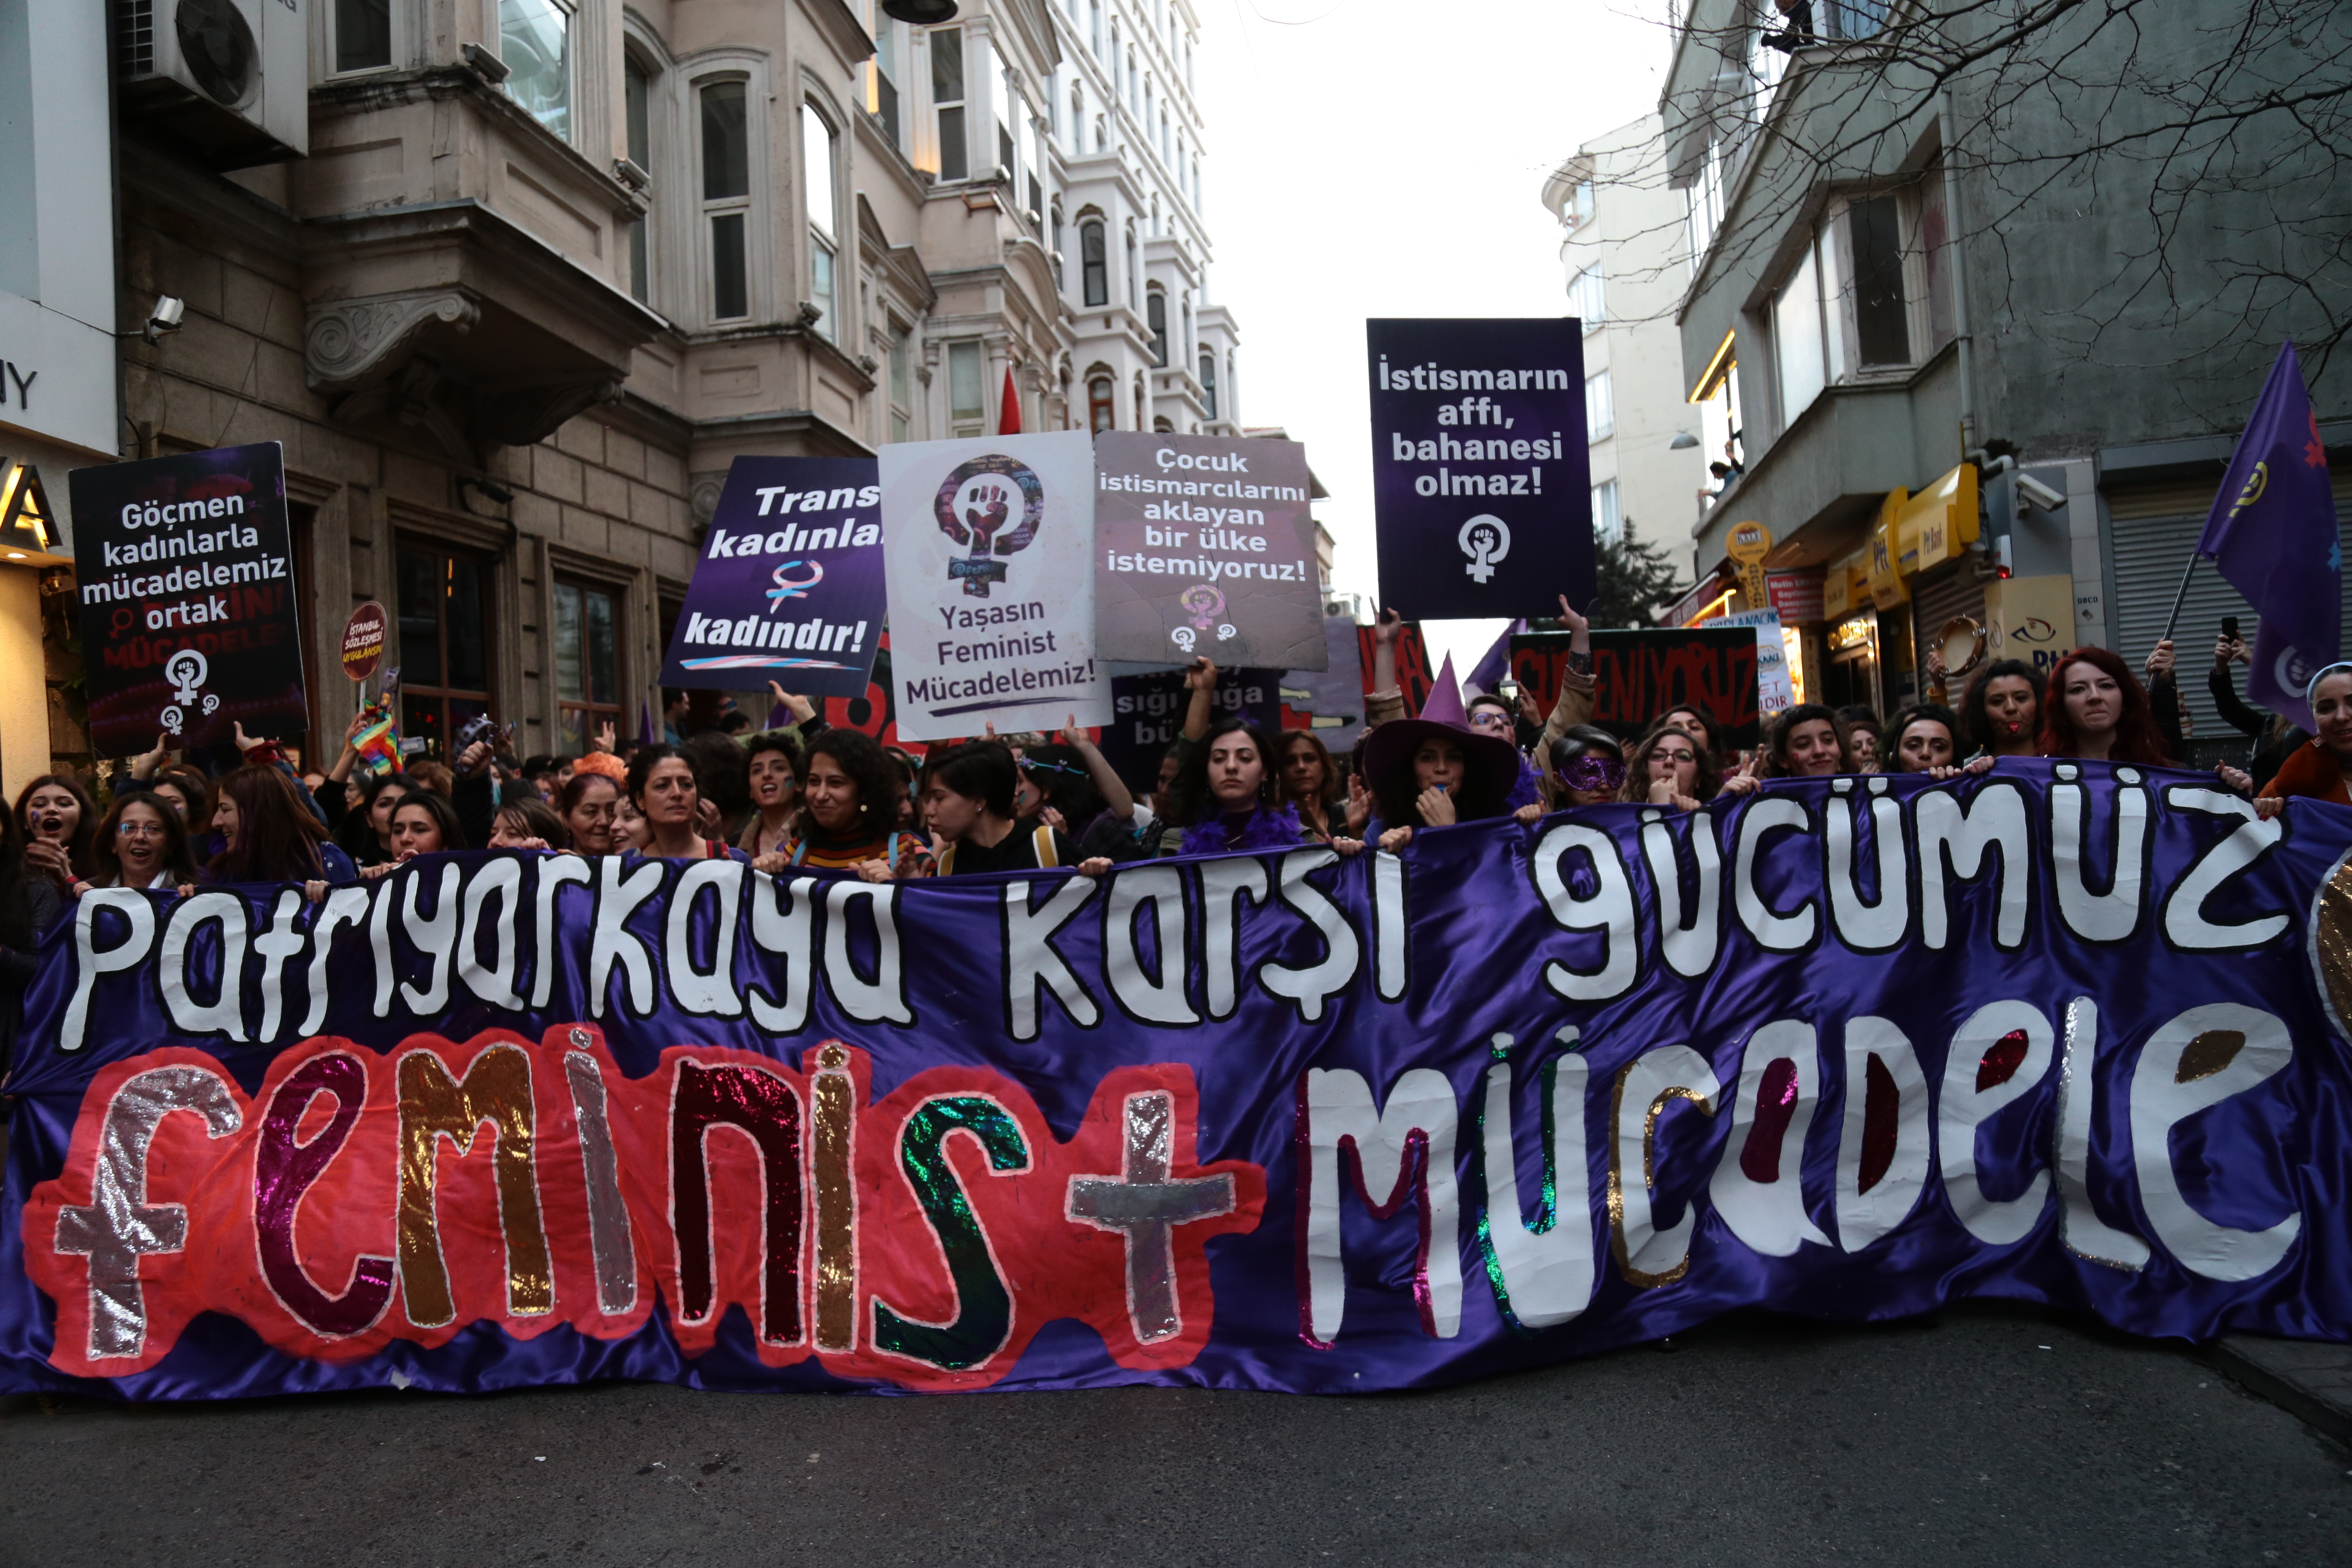 Protestors carrying banners and signs. 18th Istanbul Feminist Night March, 8 March 2020.